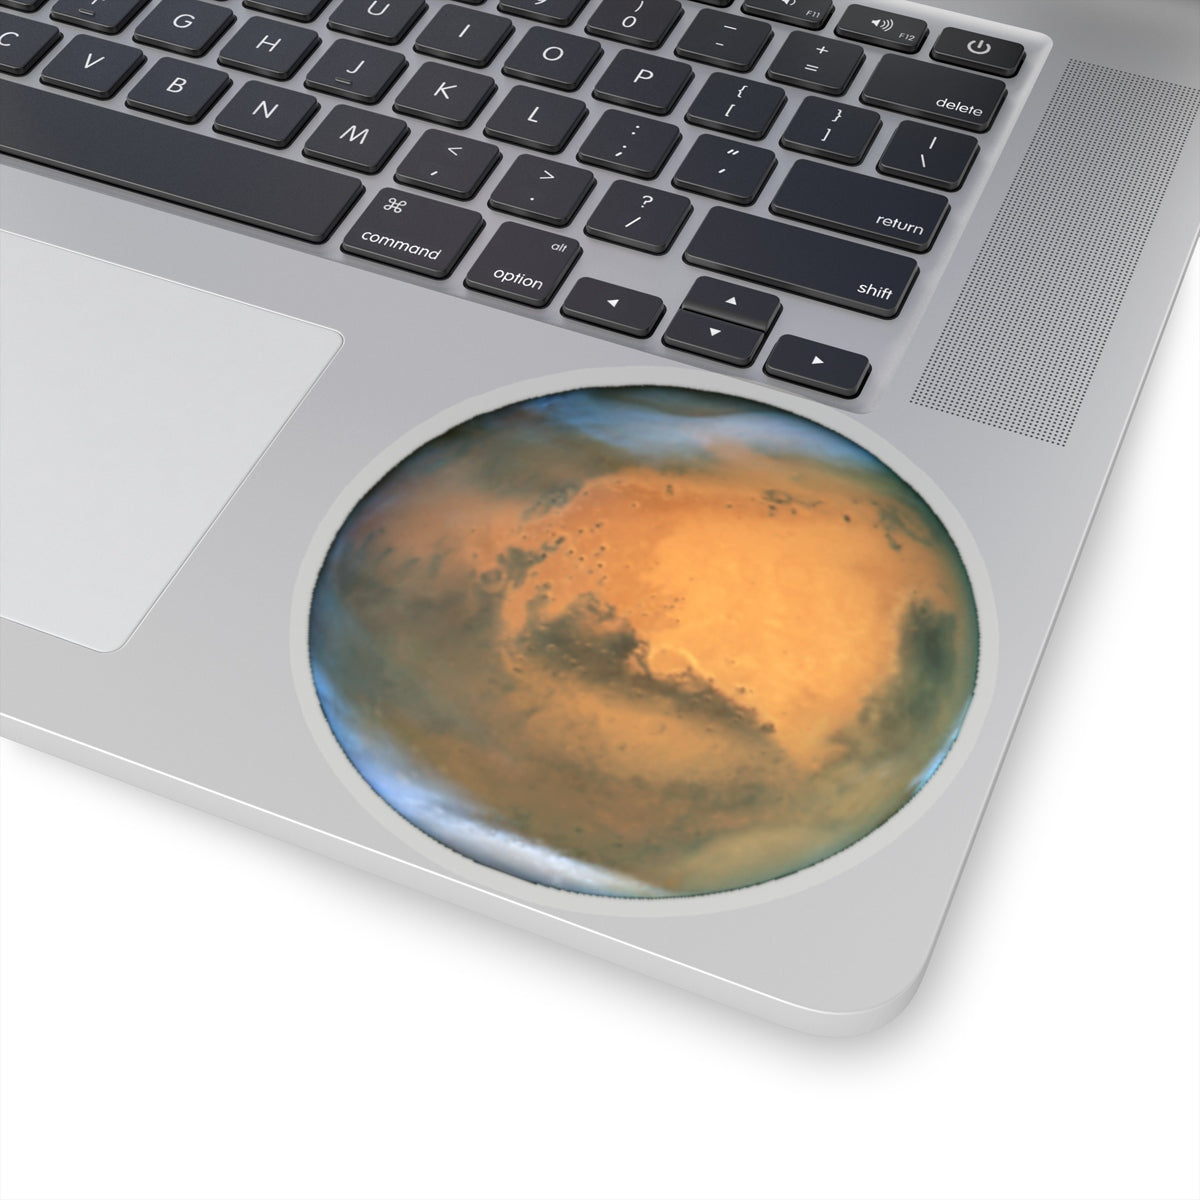 Mars Decal, Planet Stickers Laptop Vinyl Cute Waterbottle Tumbler Car Bumper Aesthetic Label Wall Mural Decal Die Cut Starcove Fashion